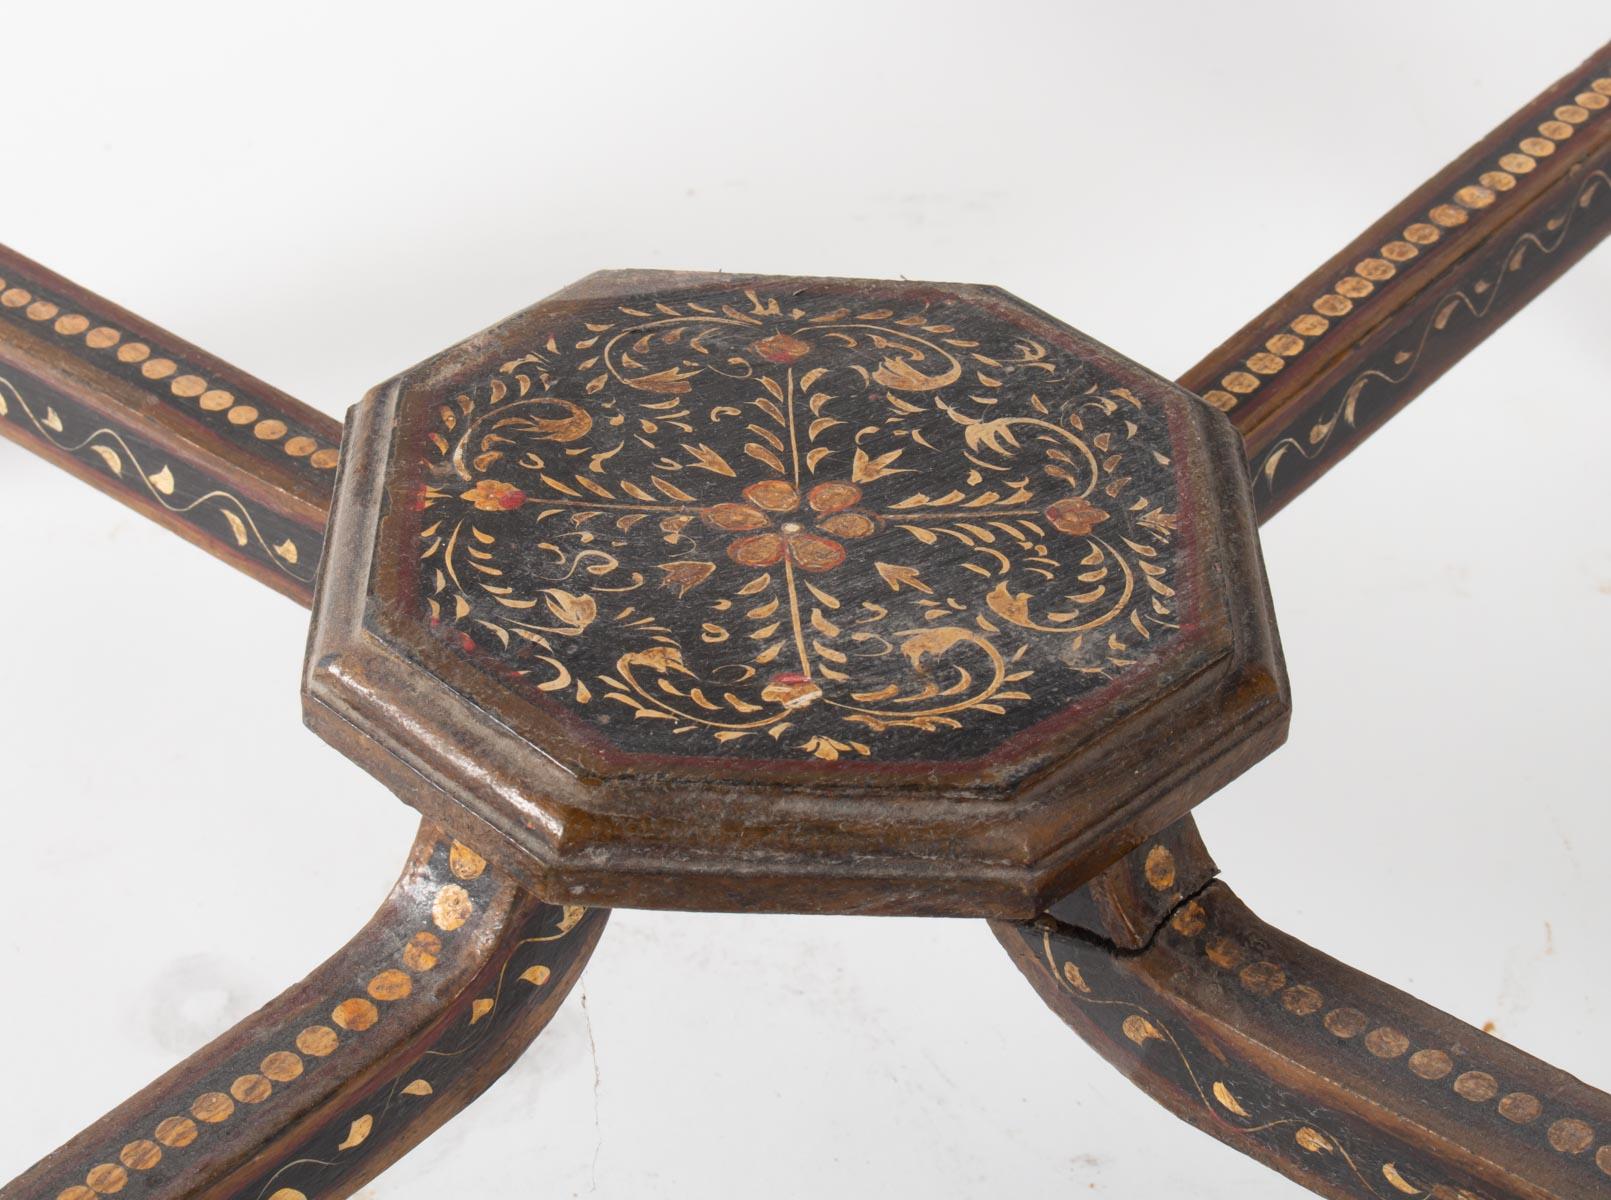 20th Century Octagonal Table in Polychrome Wood, North India, 1900